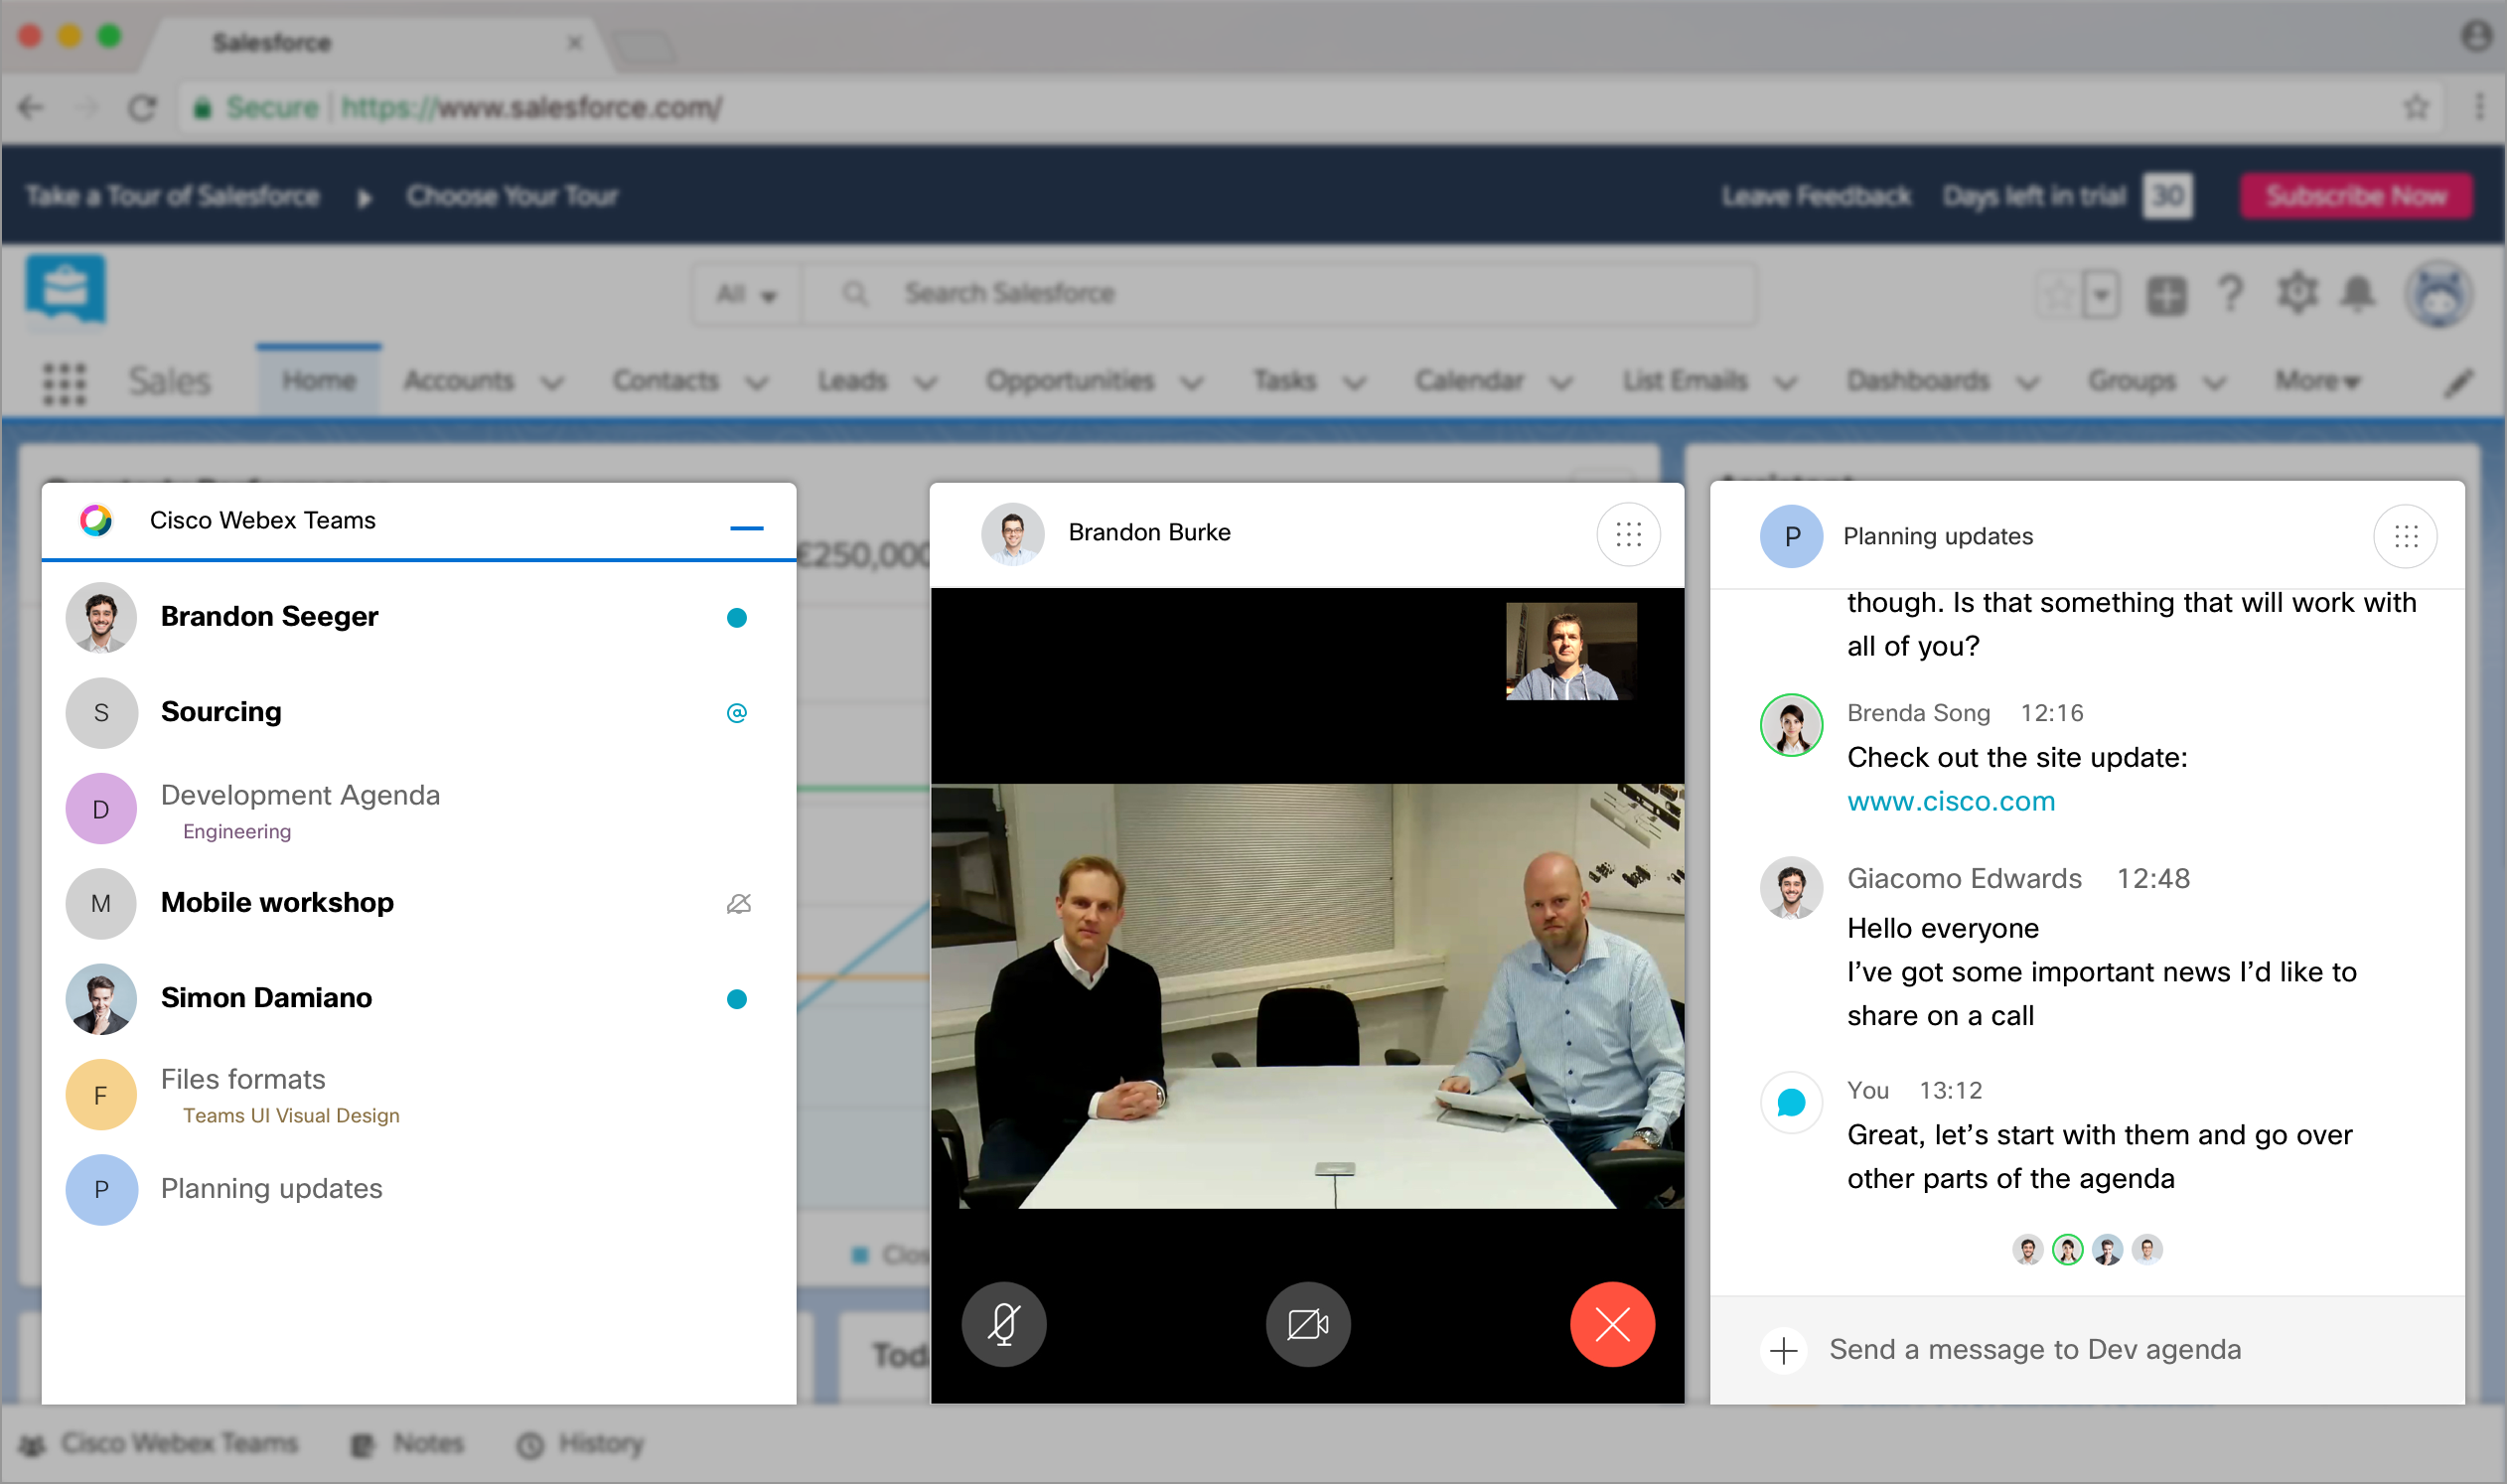 webex teams install for all users